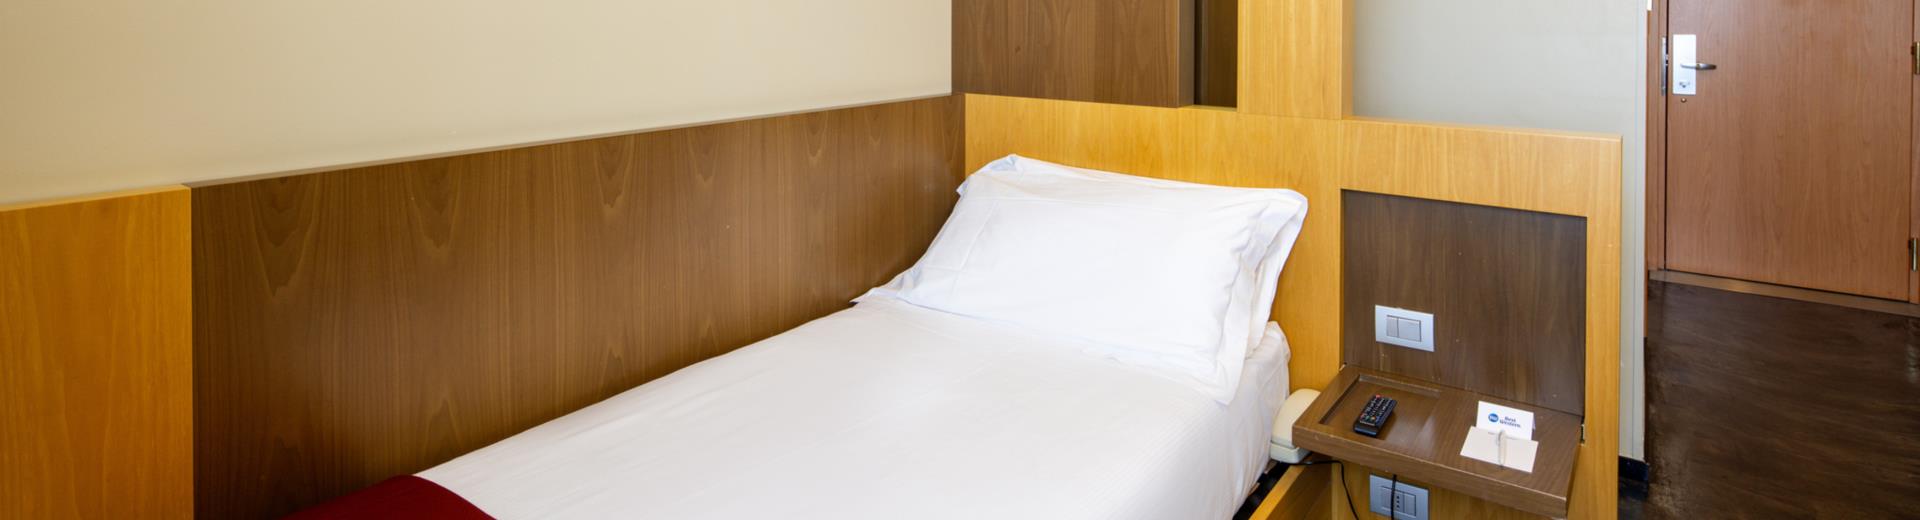 Single room at the Best Western Hotel Major in Milan. Comfortable and welcoming, it is equipped with a 32-inch LCD satellite TV with radio and alarm clock, free Wi-Fi internet and minibar.